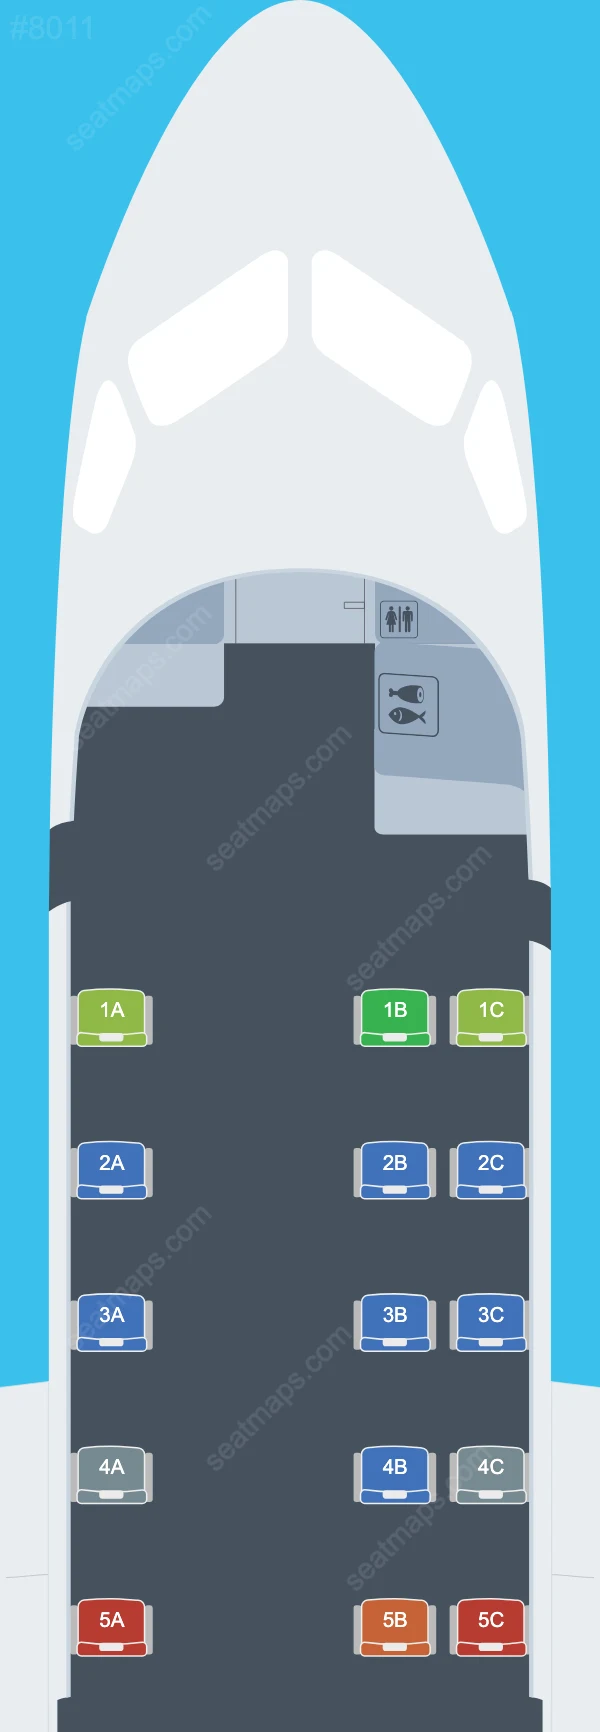 Air Chathams Saab S340 seatmap mobile preview